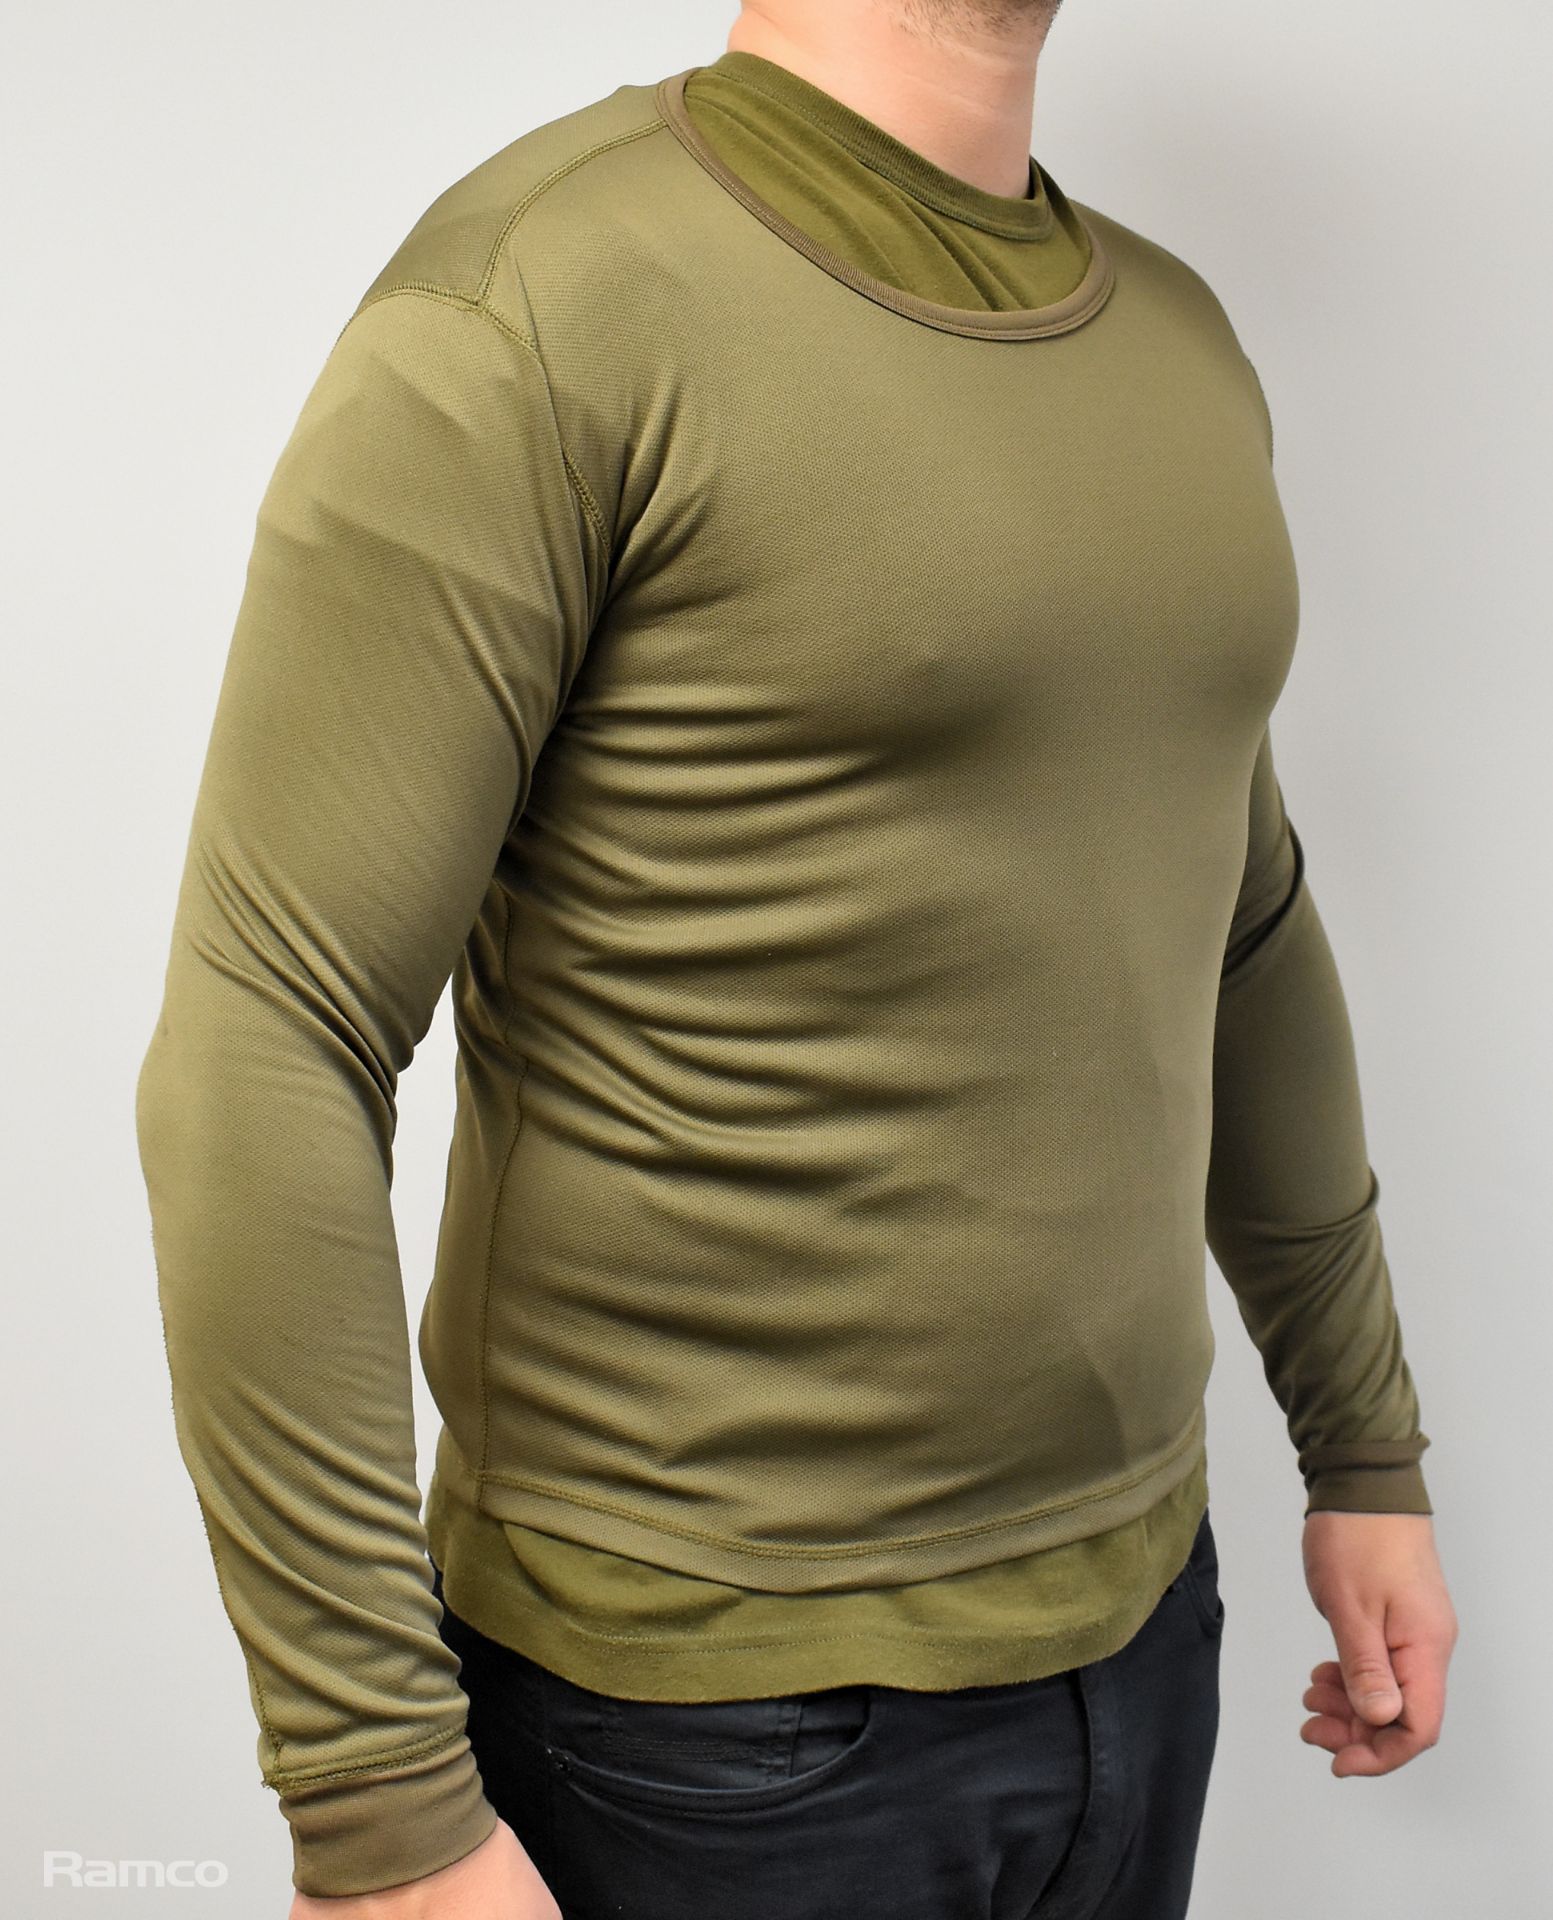 50x Thermal underwear long sleeved vests - mixed colours - mixed grades and sizes - Image 4 of 7